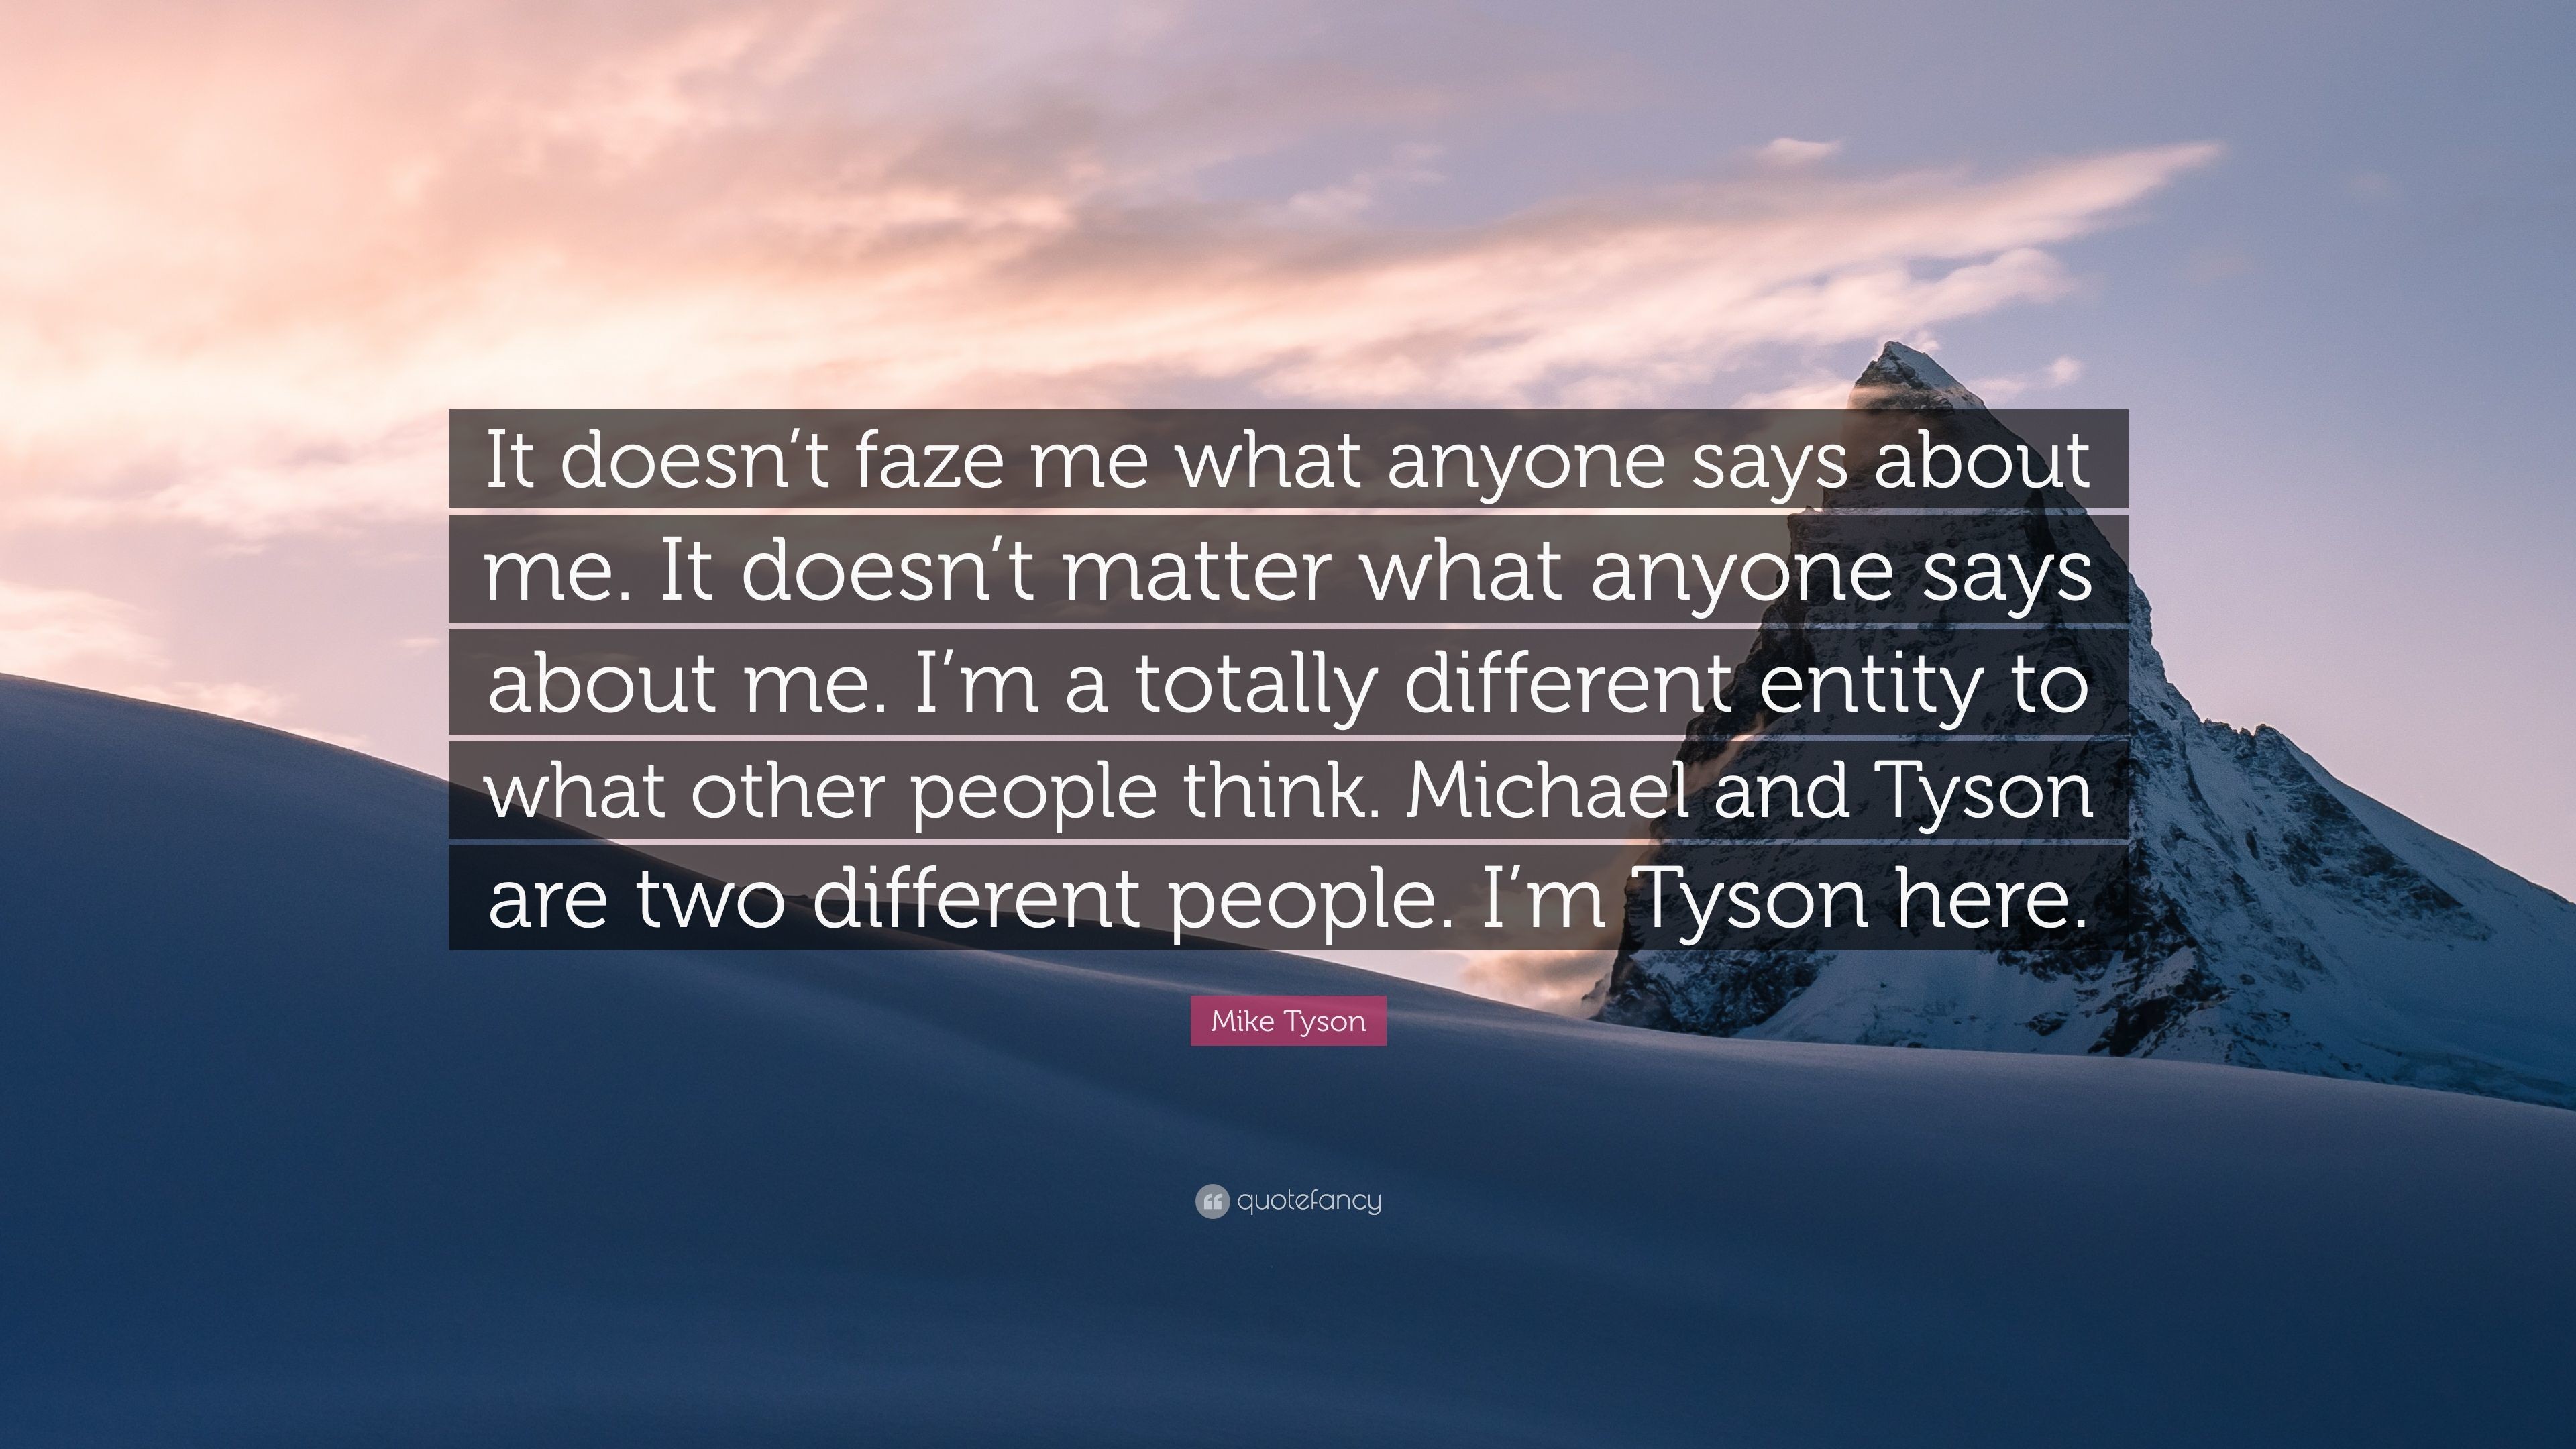 3840x2160 Mike Tyson Quote: “It doesn't faze me what anyone says about me